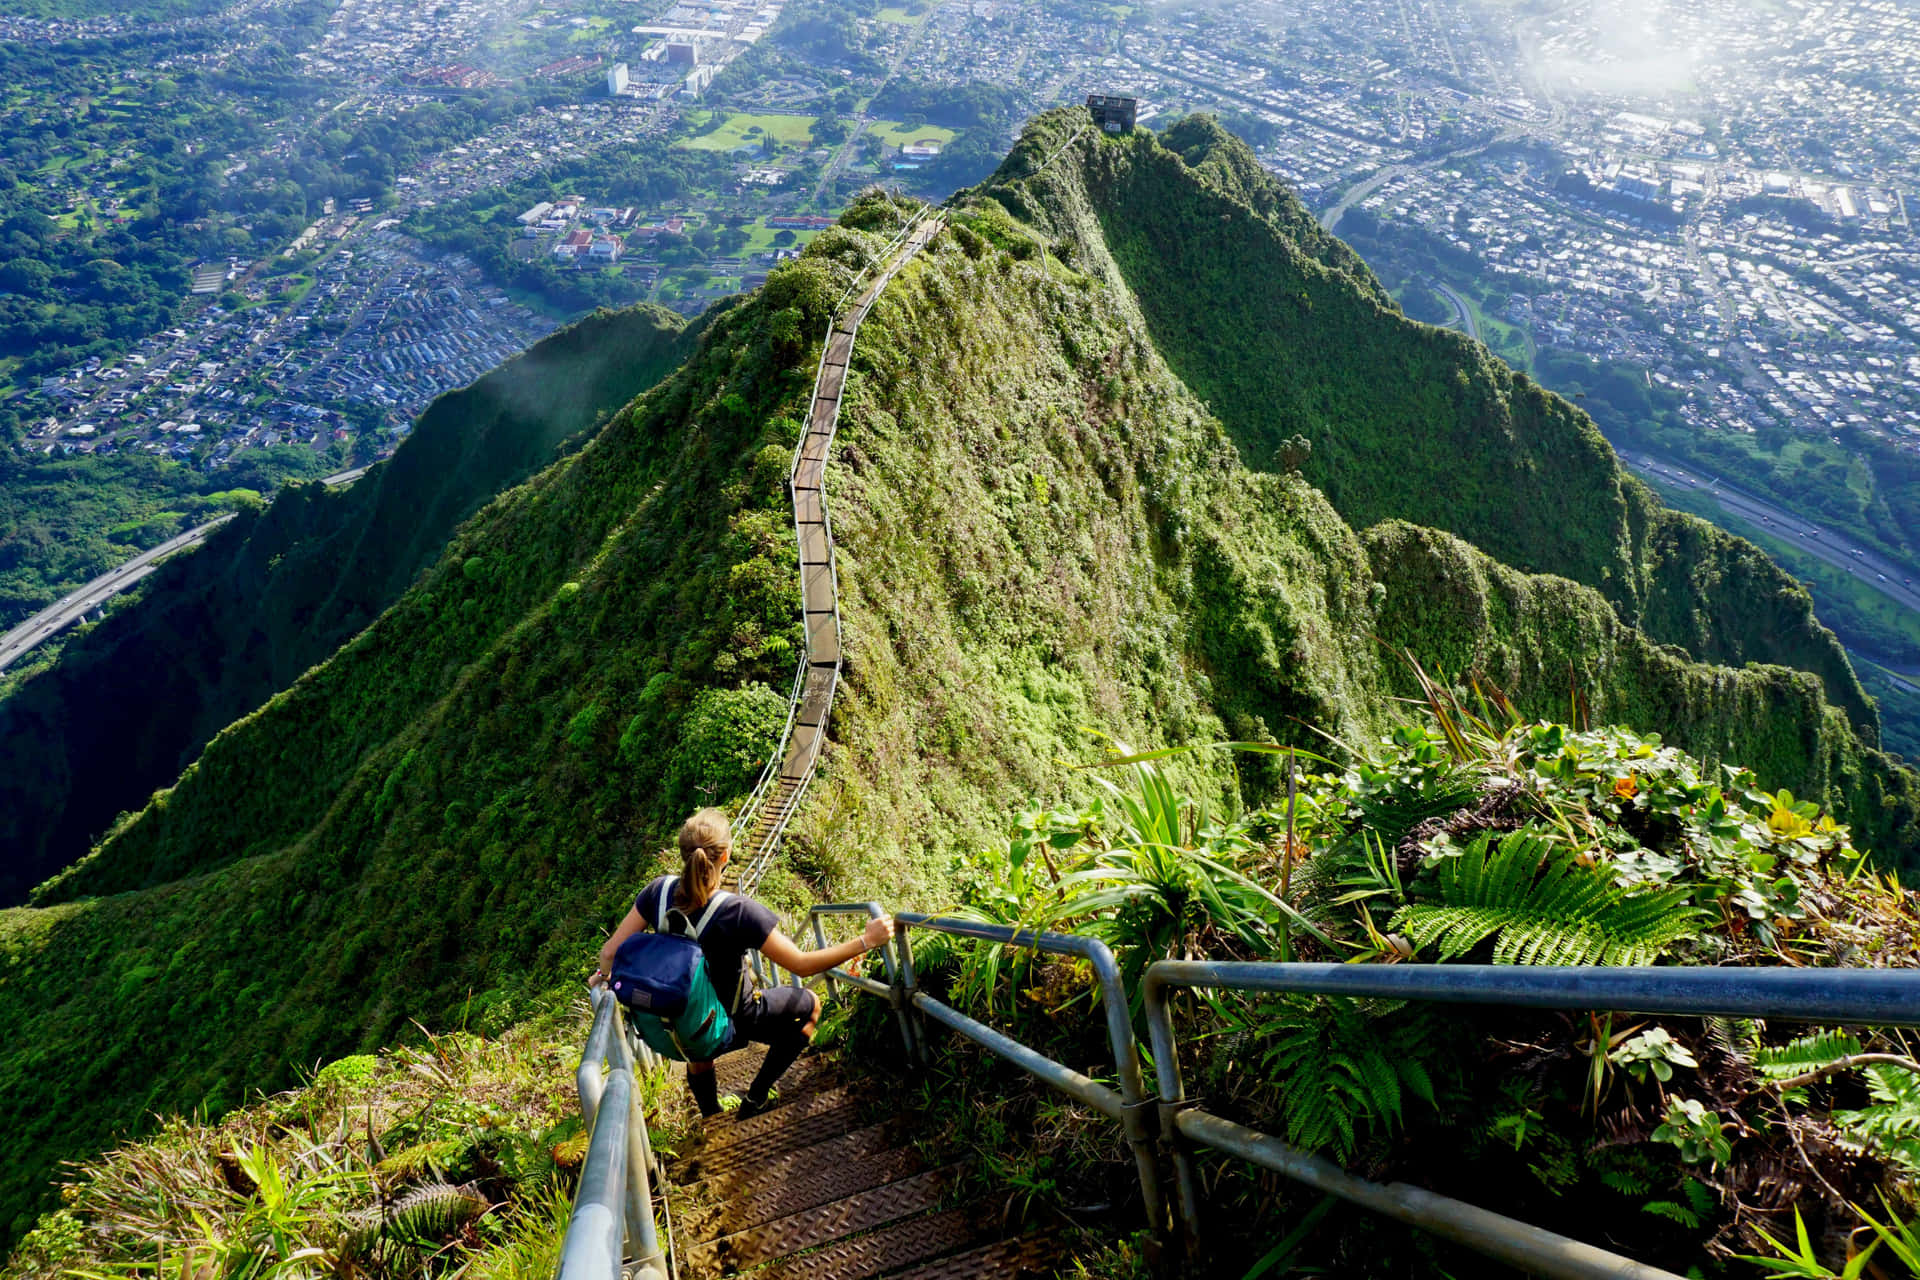 A breathtaking view of the Stairway to Heaven trail amidst lush greenery and misty mountains